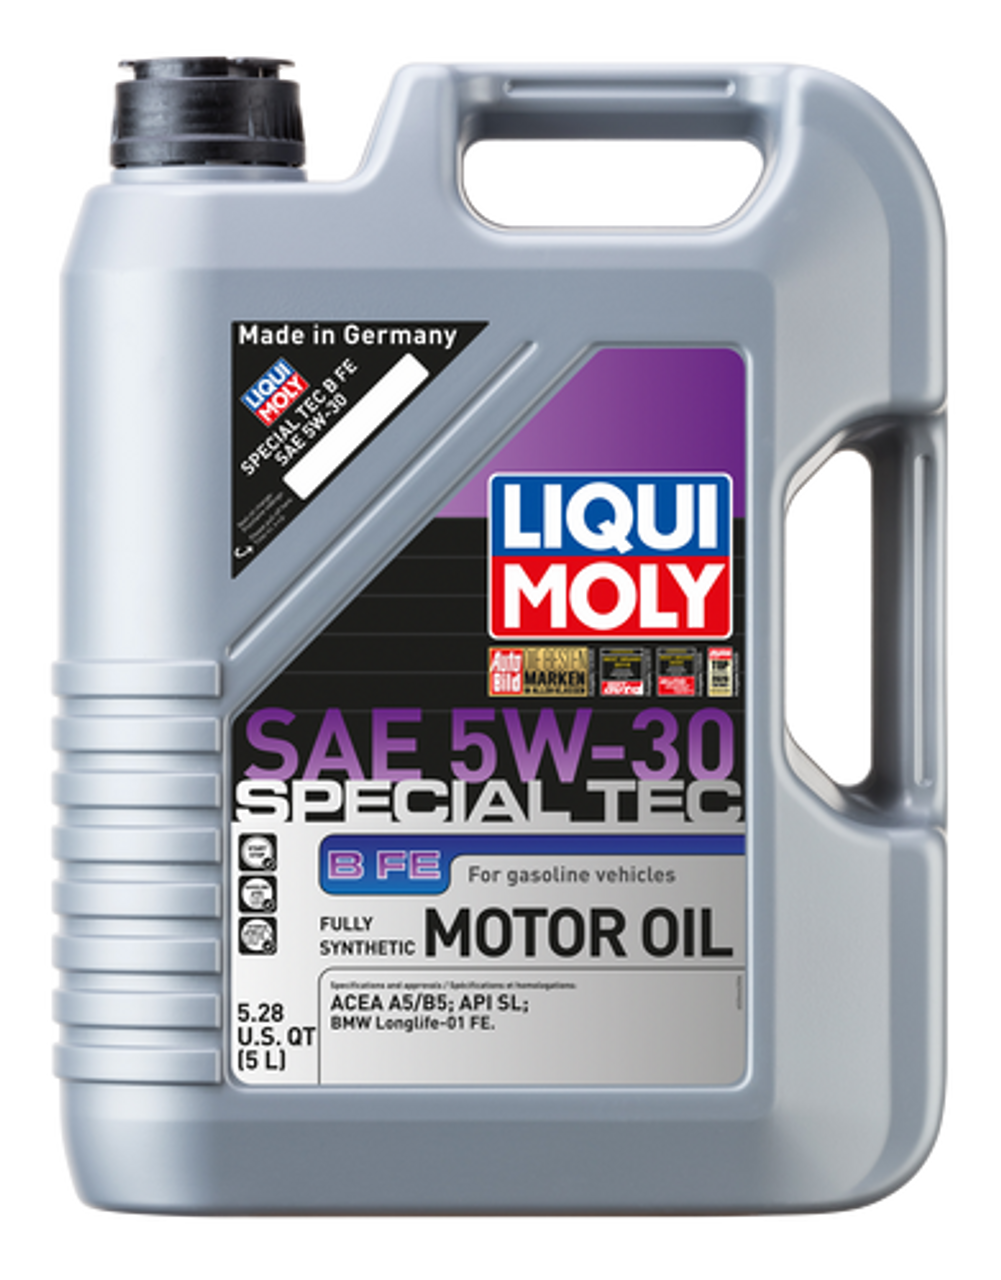 Liqui Moly 5W30 Special Tec B FE Engine Oil (5 Liters) - LM 20444 - For  Hyundai Genesis Coupe 2.0T 2010-14 (LM20444)